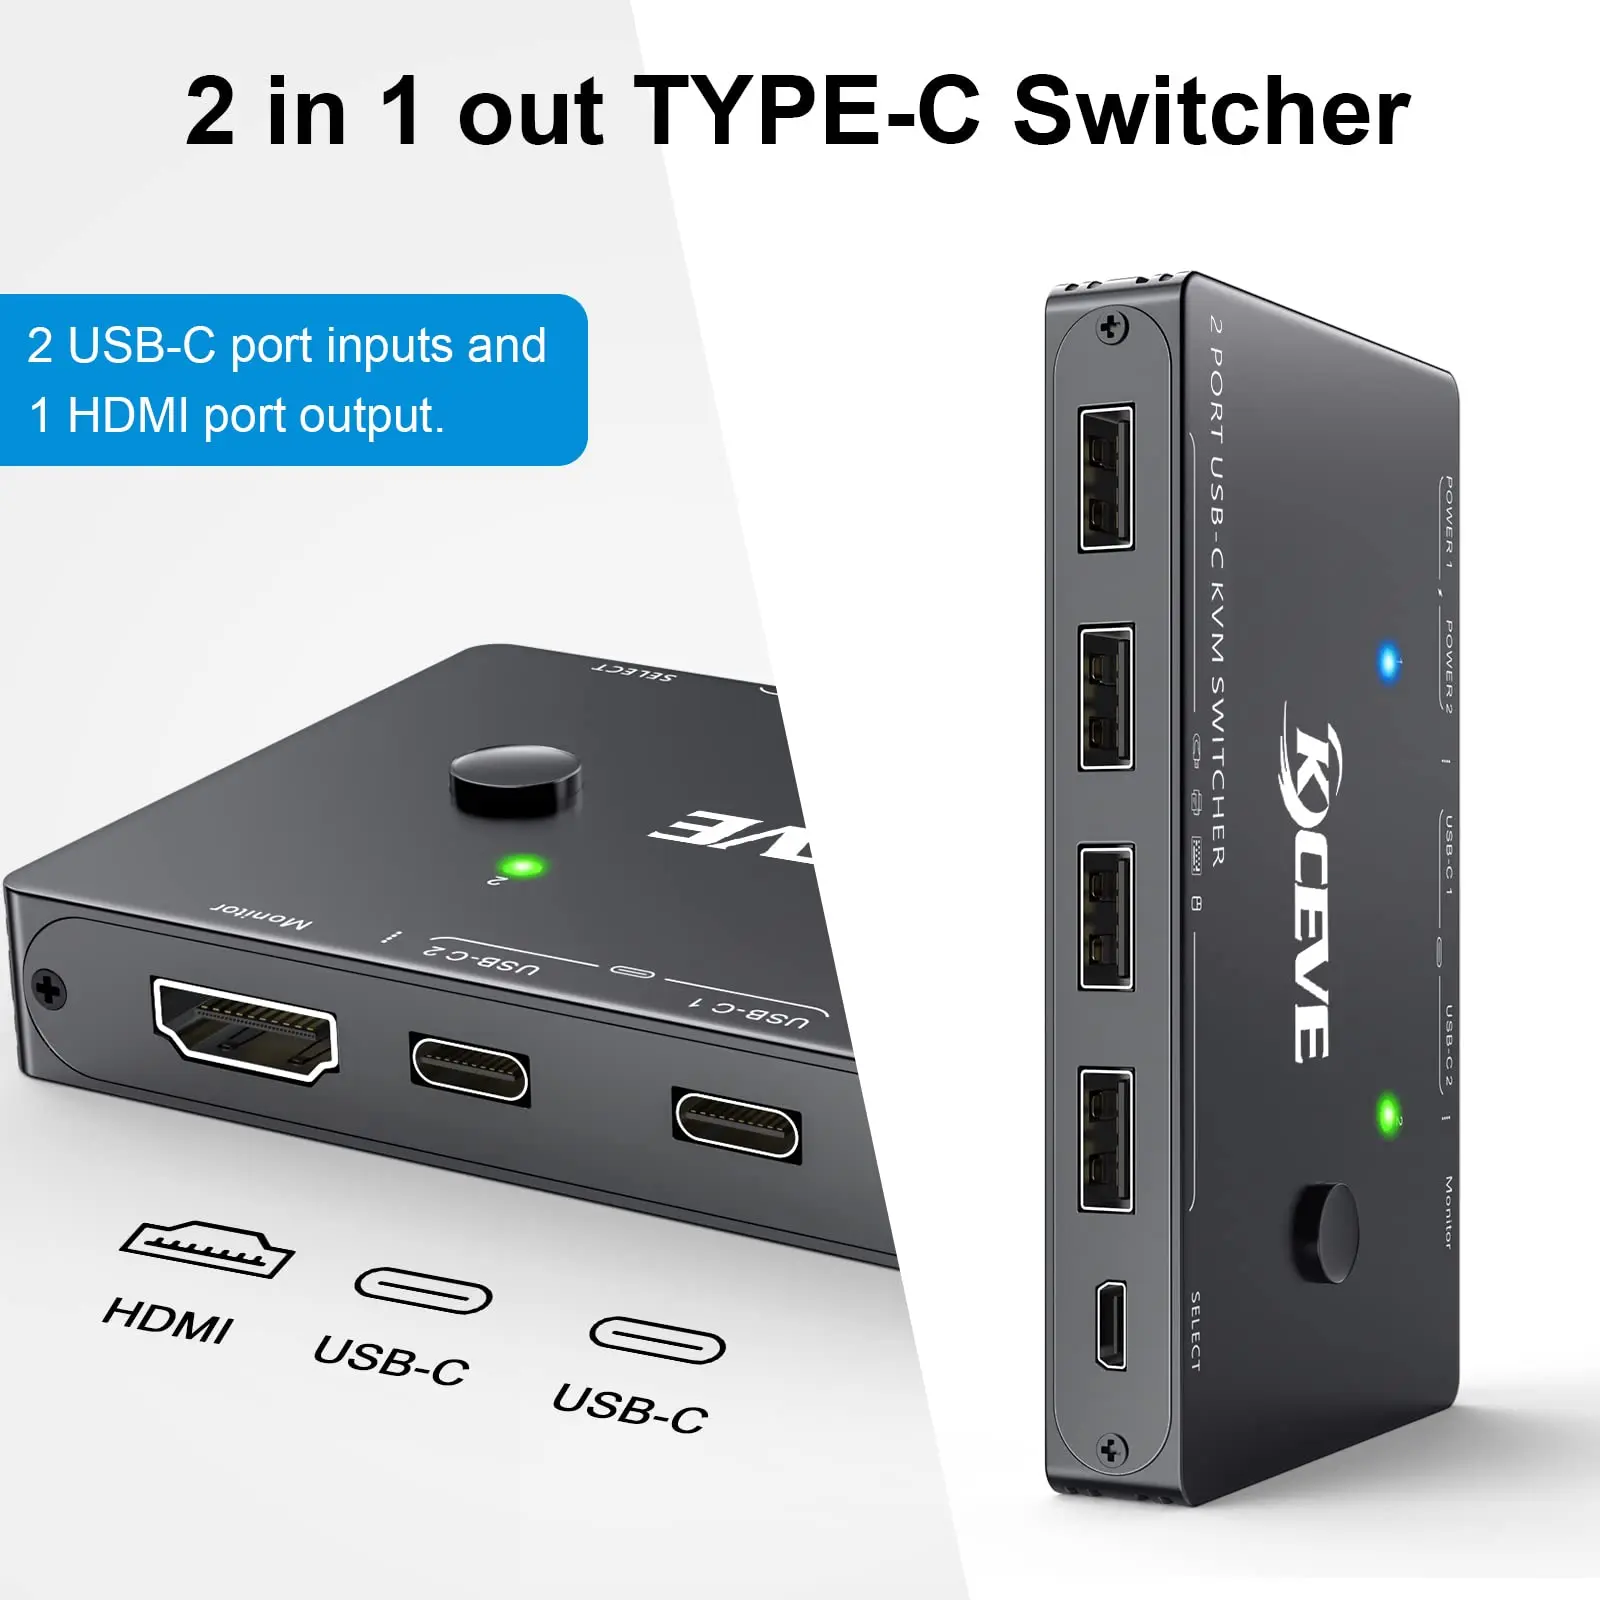 USB-C KVM Switch, 2 Ports KVM Type-C Switcher Box Support 4K@60Hz for 2 Computers Share Keyboard Mouse and Monitor